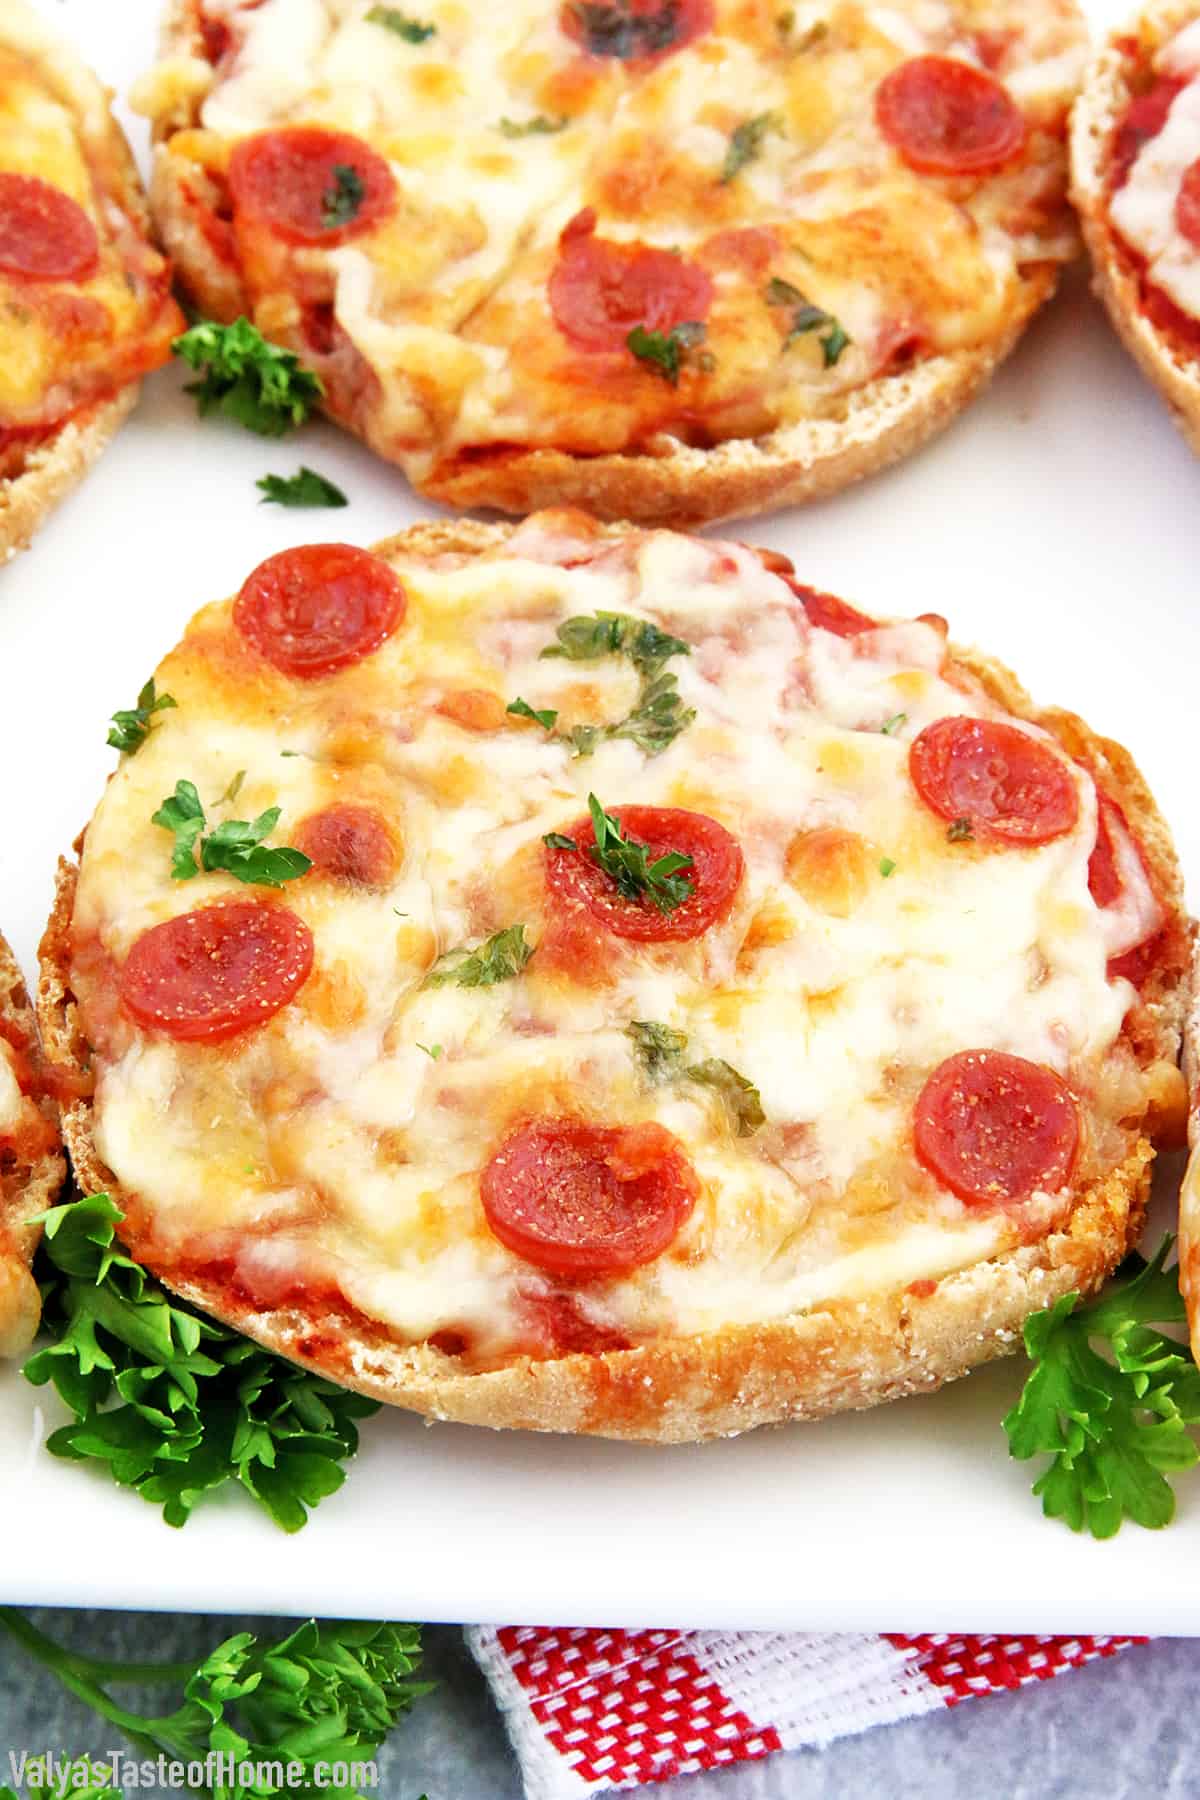 These English Muffin Mini Pepperoni Pizzas is a great project for the kiddos. It takes just a few basic ingredients, but the little ones love making them. They feel like they cooked their own pizza! #cookingwithkids #minipizzas #englishmuffinminipizzas #valyastateofhome